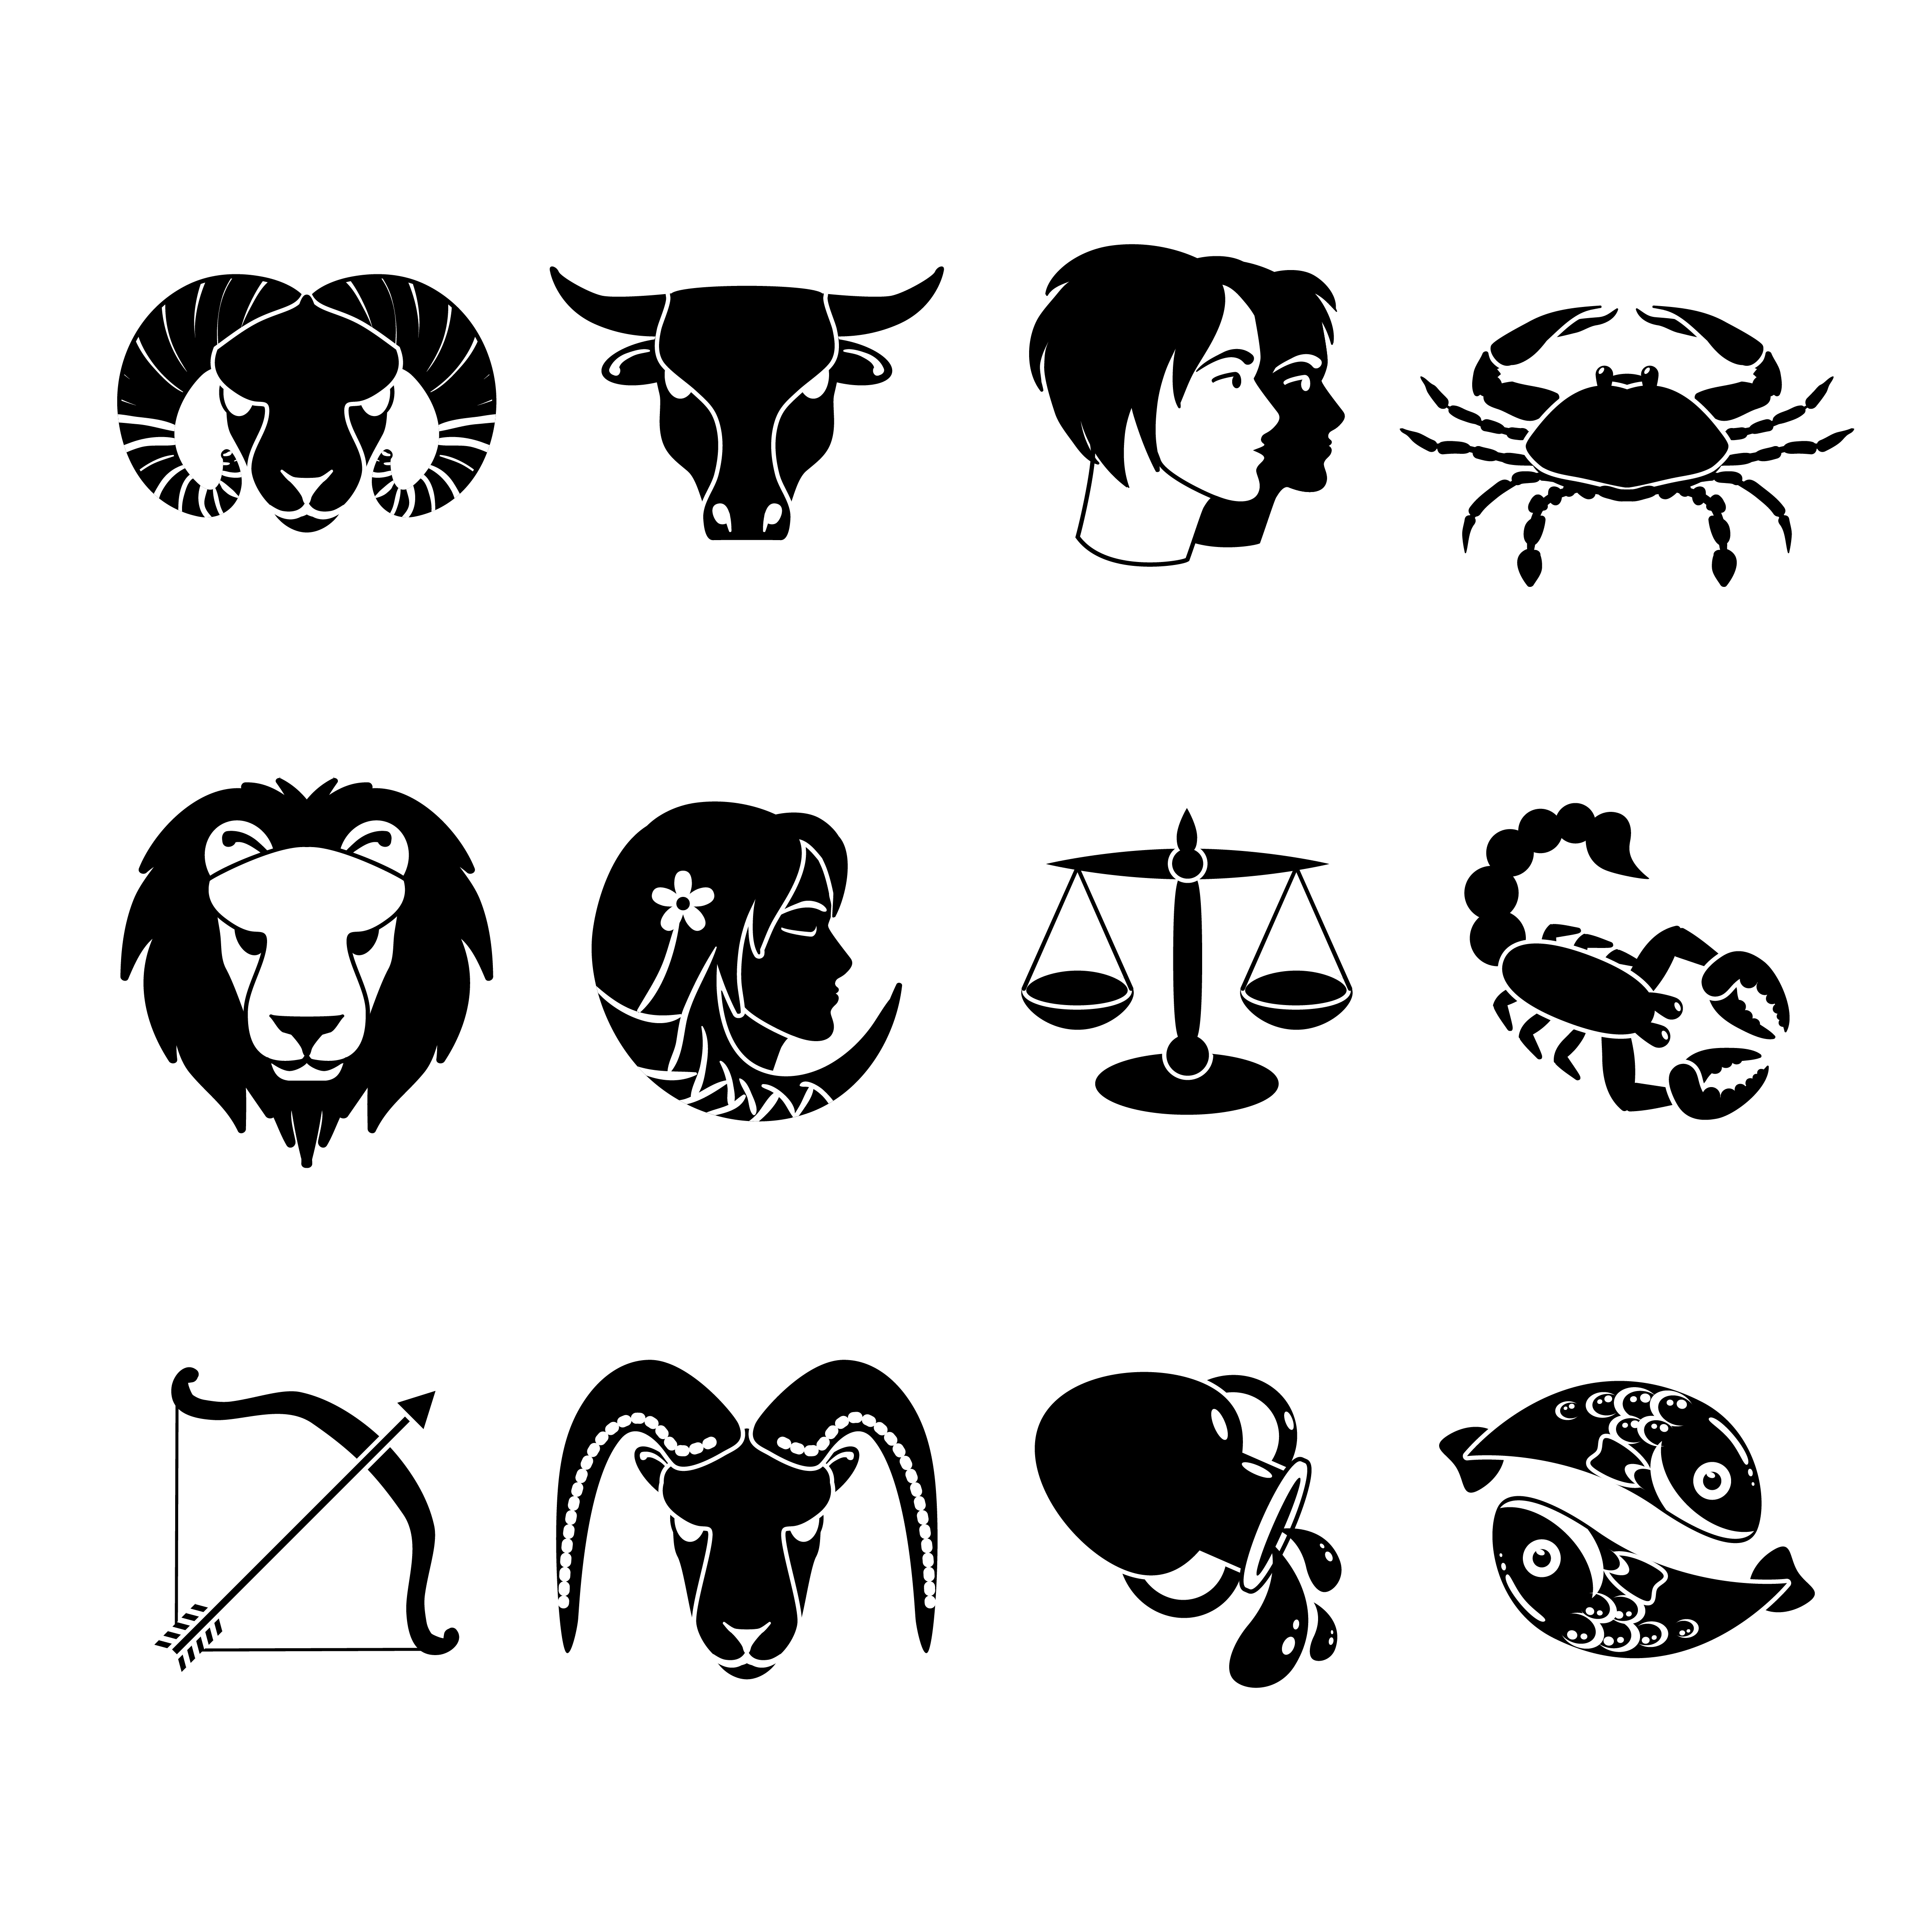 Zodiac Signs Vector Art Icons And Graphics For Free Download - Reverasite